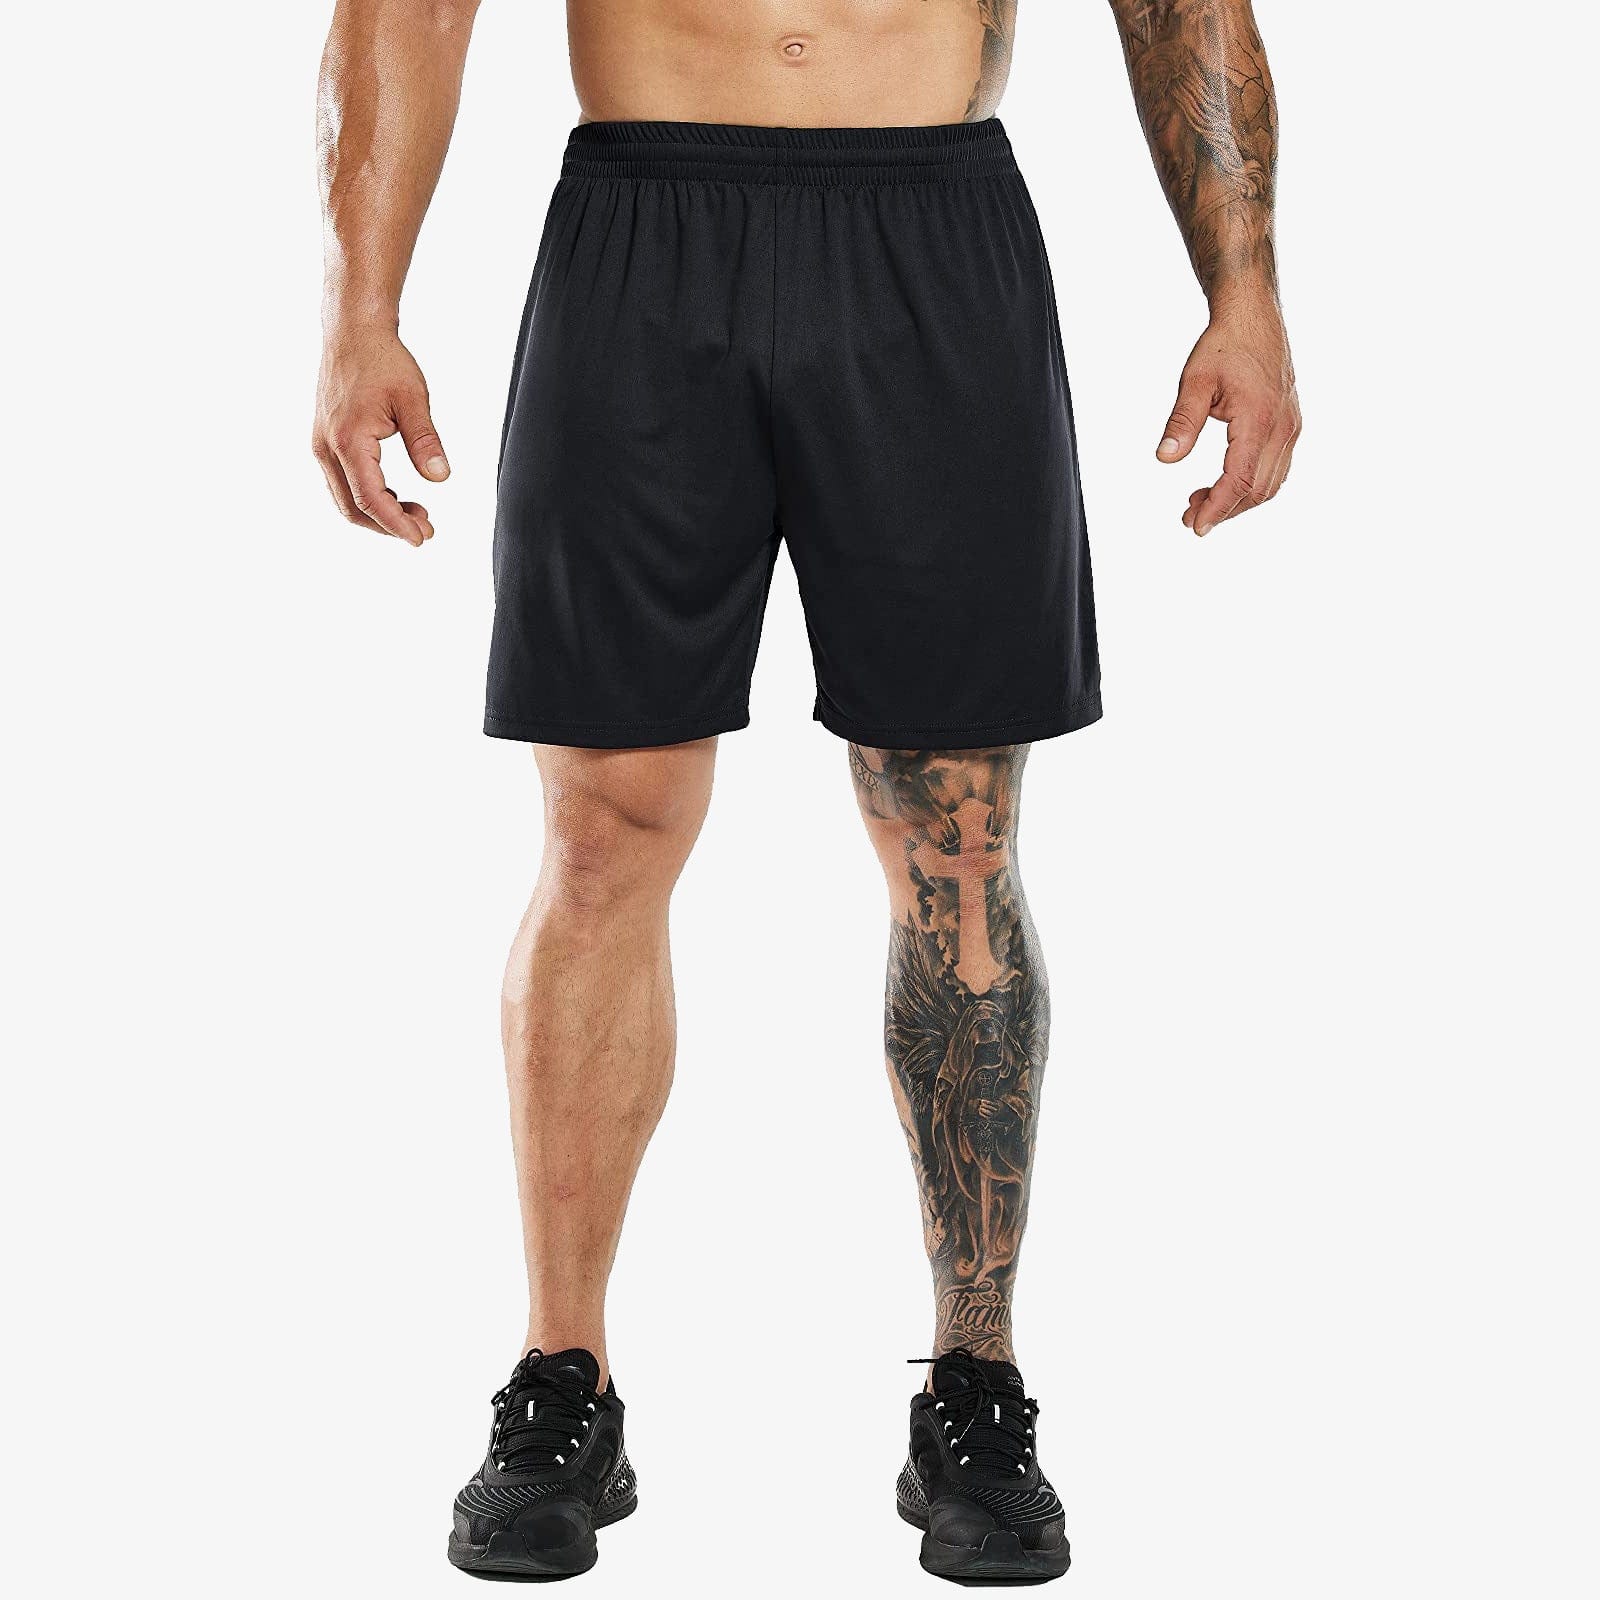 MIER Men Quick-Dry Athletic Running Shorts without Pockets